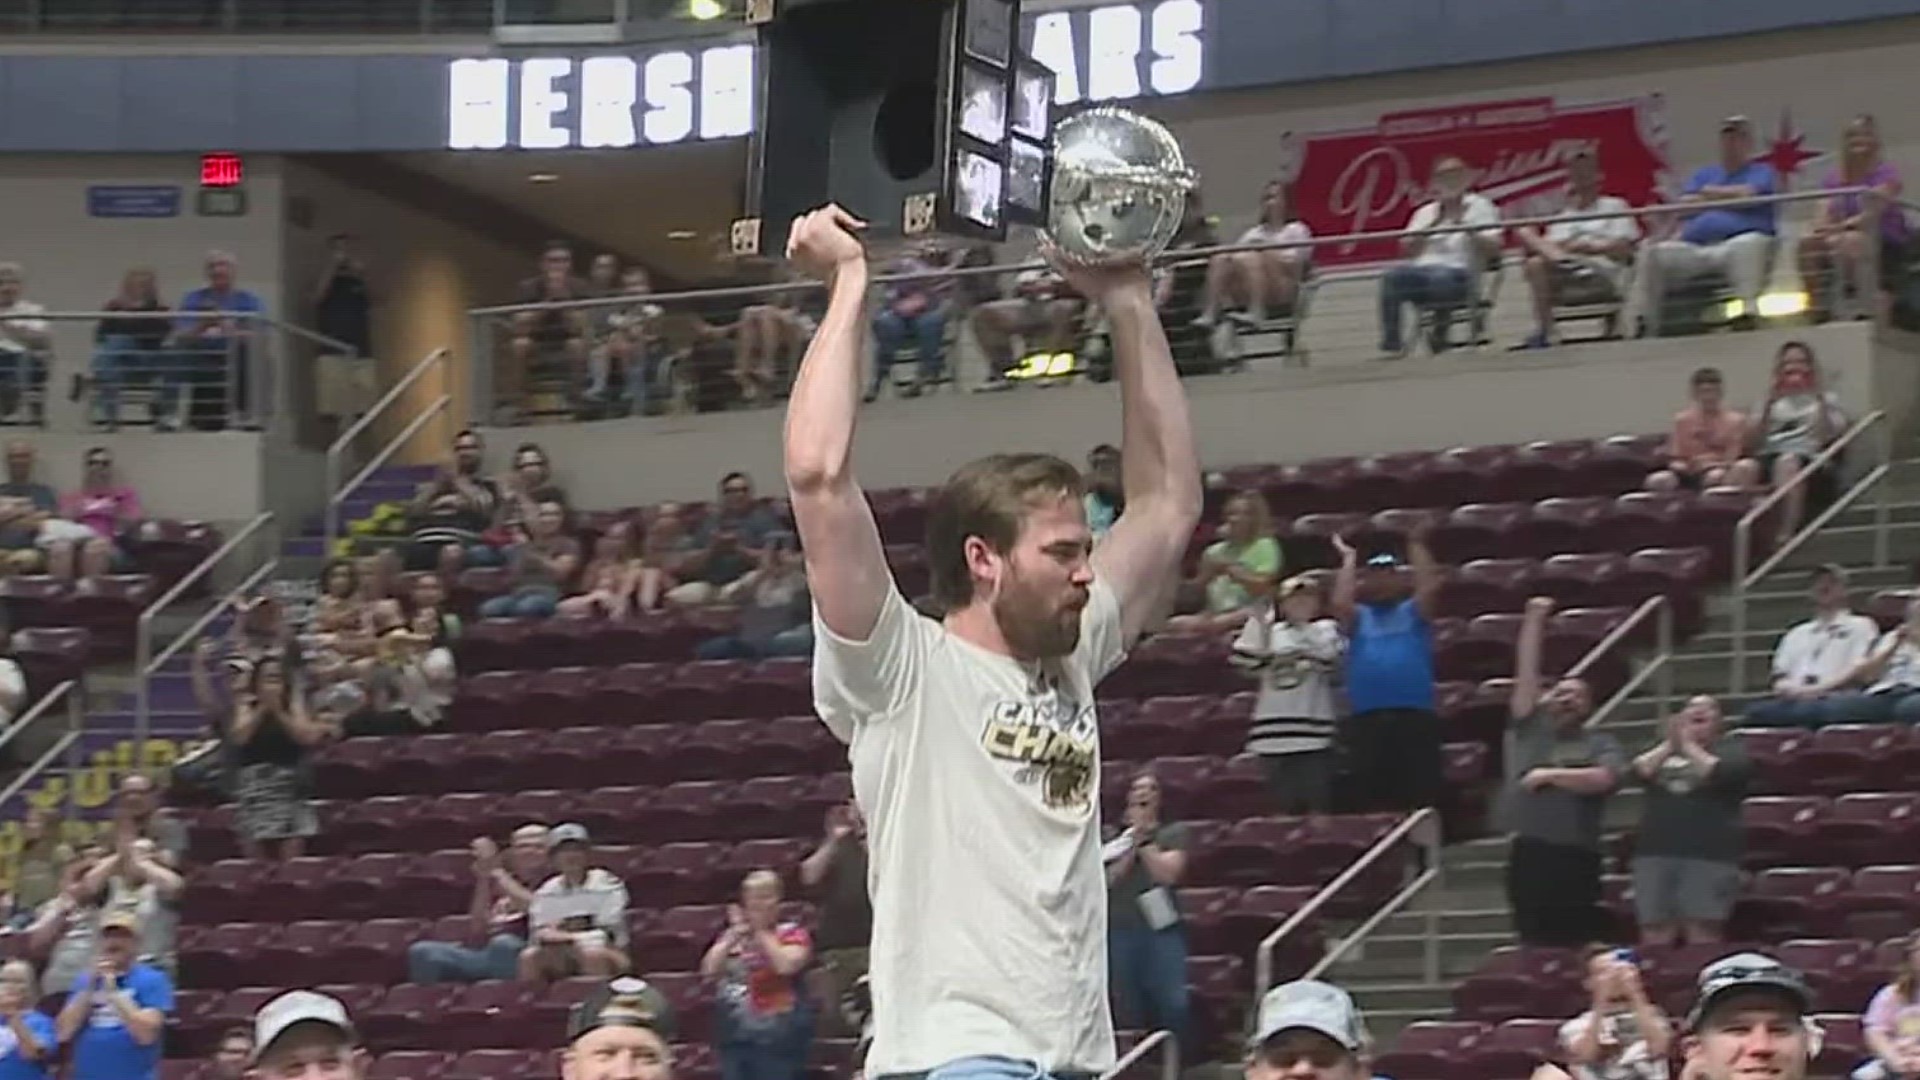 The Hershey Bears hosted a championship celebration at GIANT Center to commemorate capturing their 12th Calder Cup title in franchise history.